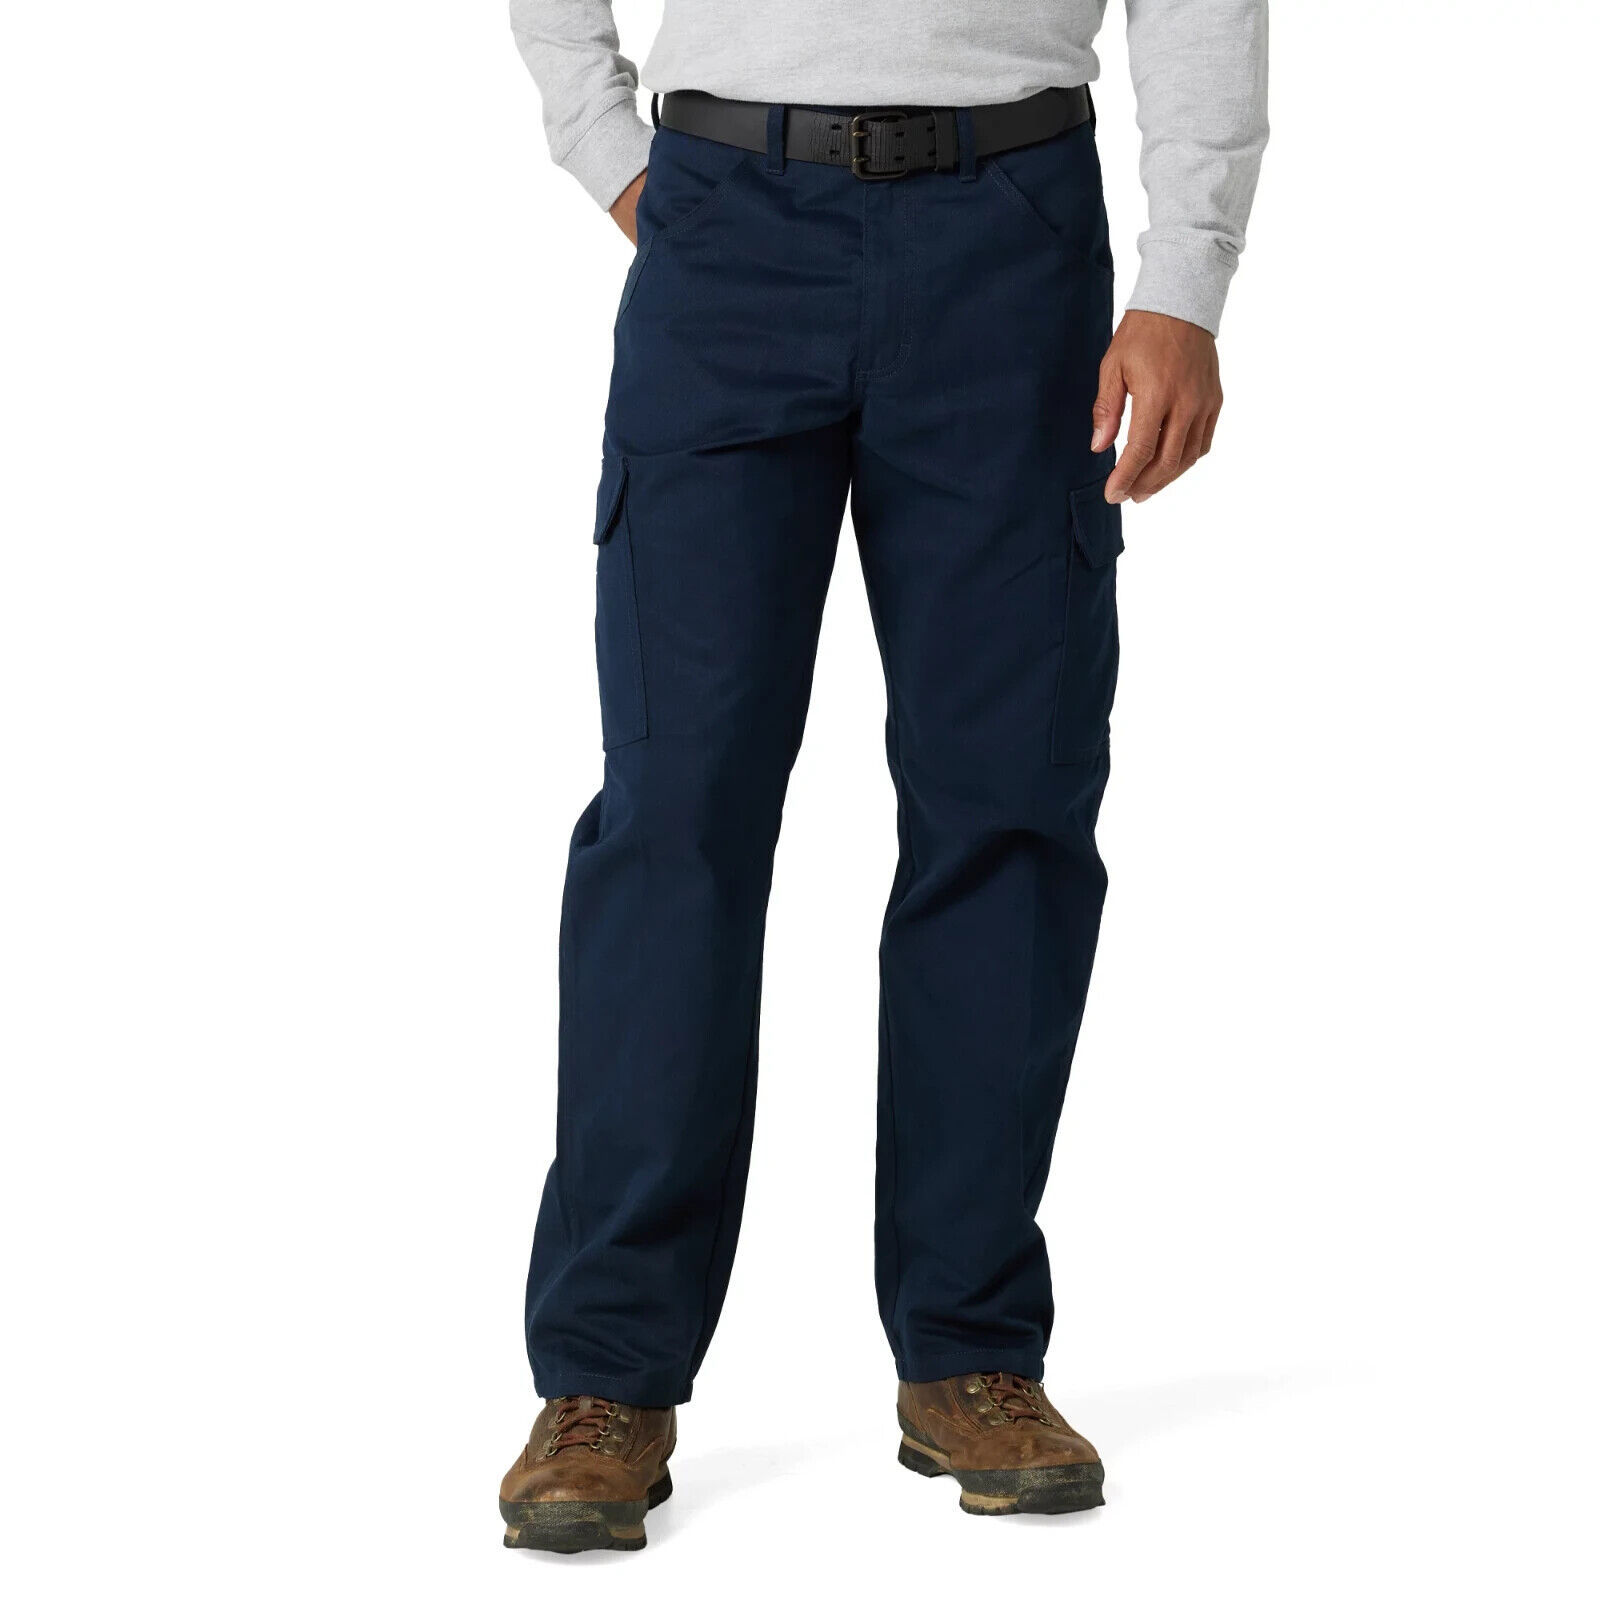 Primary image for Men's Wrangler Workwear Relaxed Fit Cargo Pant, Blue Size 44 x 32